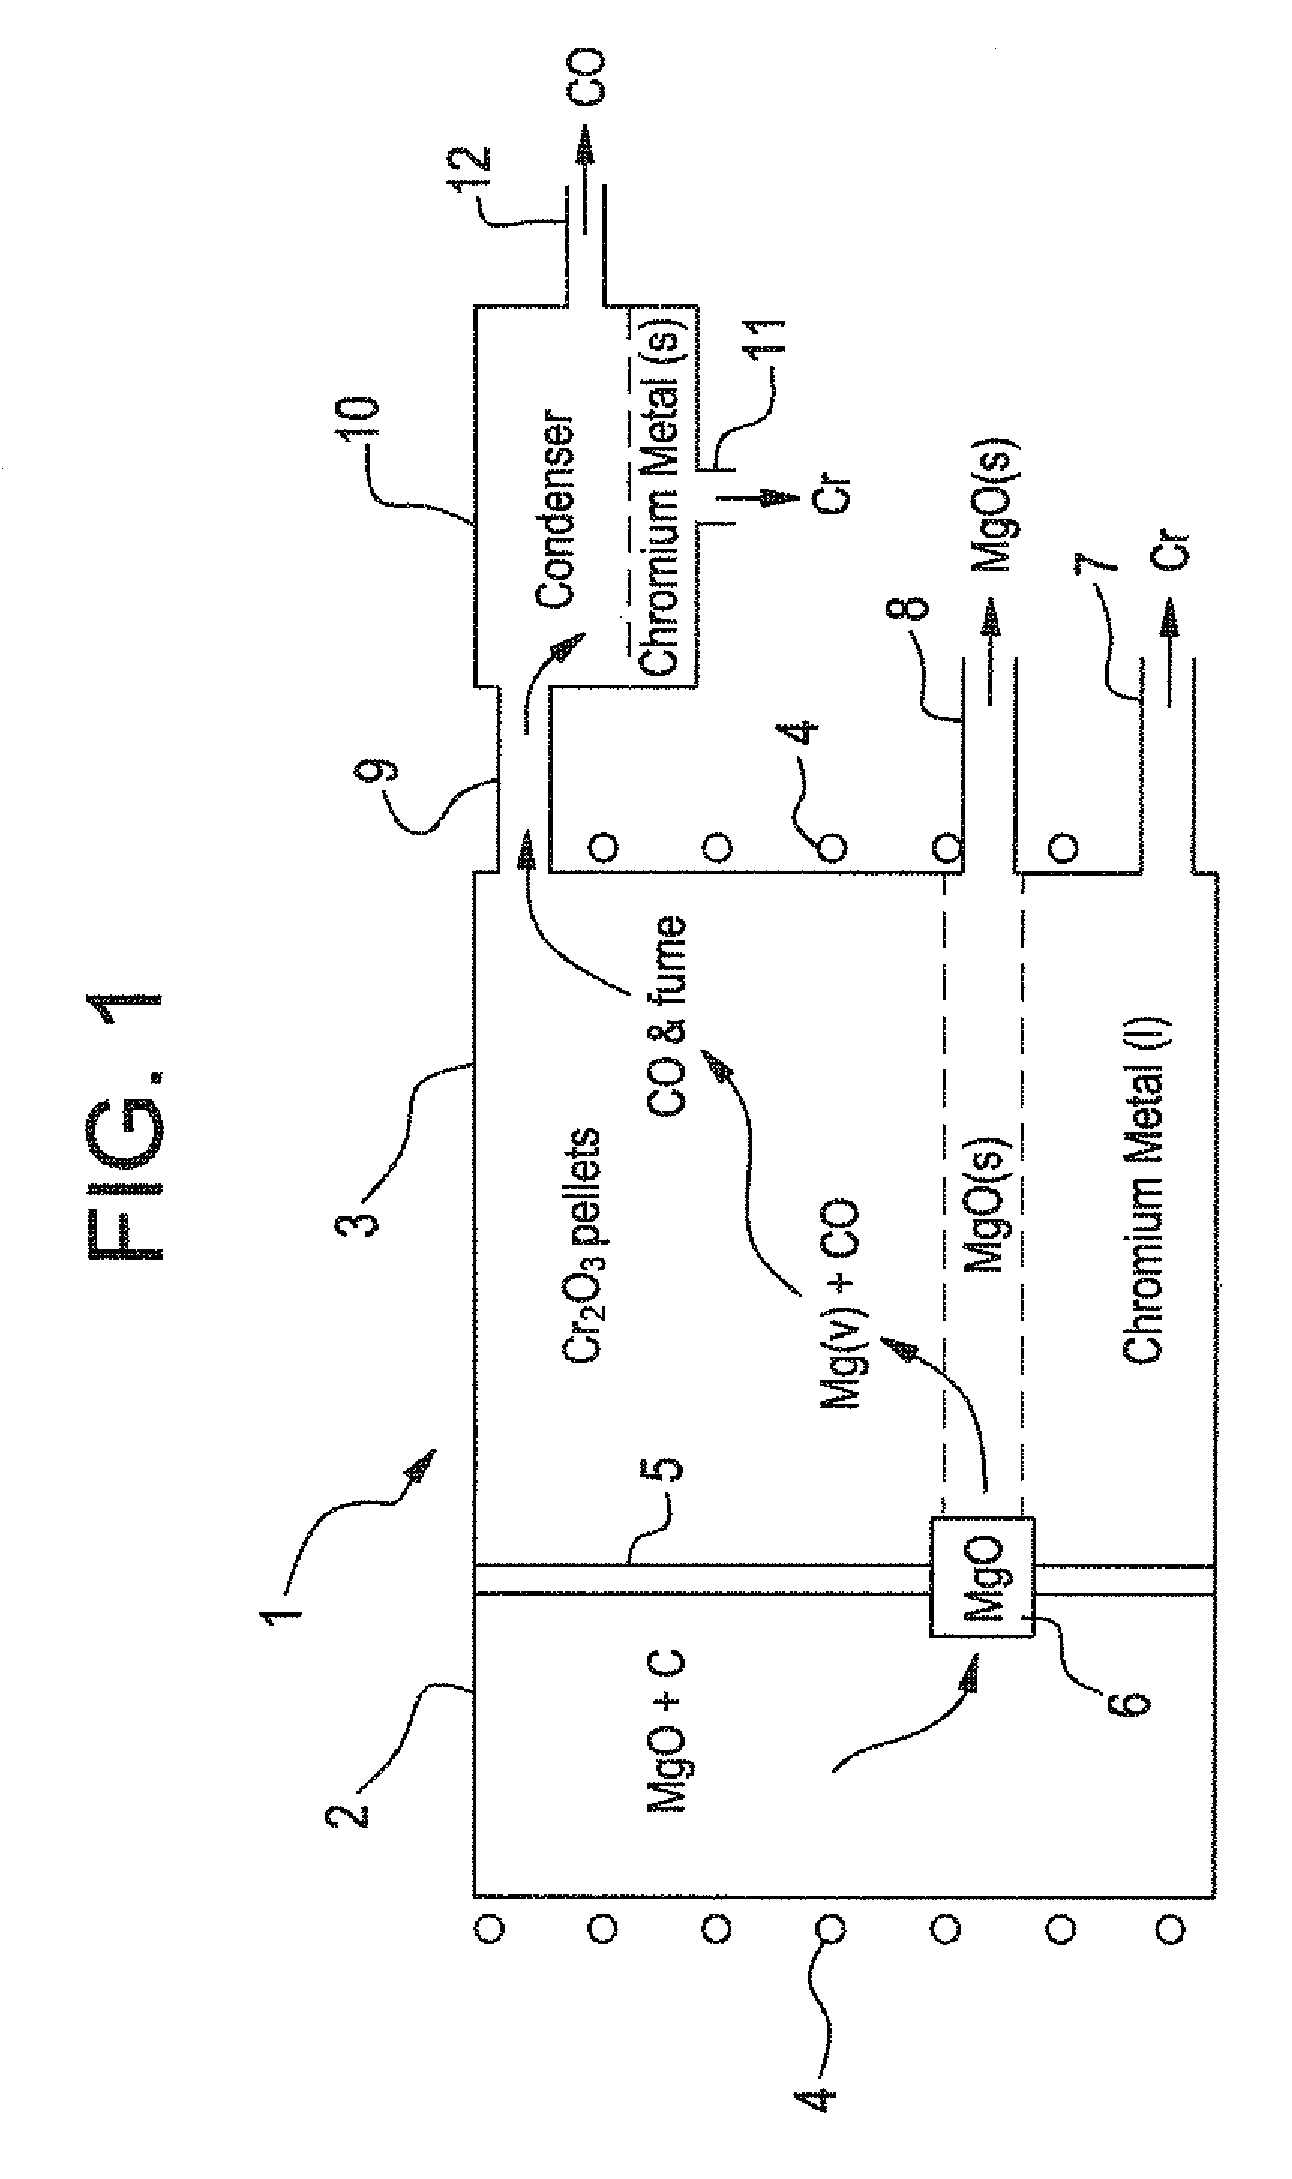 Method and apparatus for high temperature production of metals